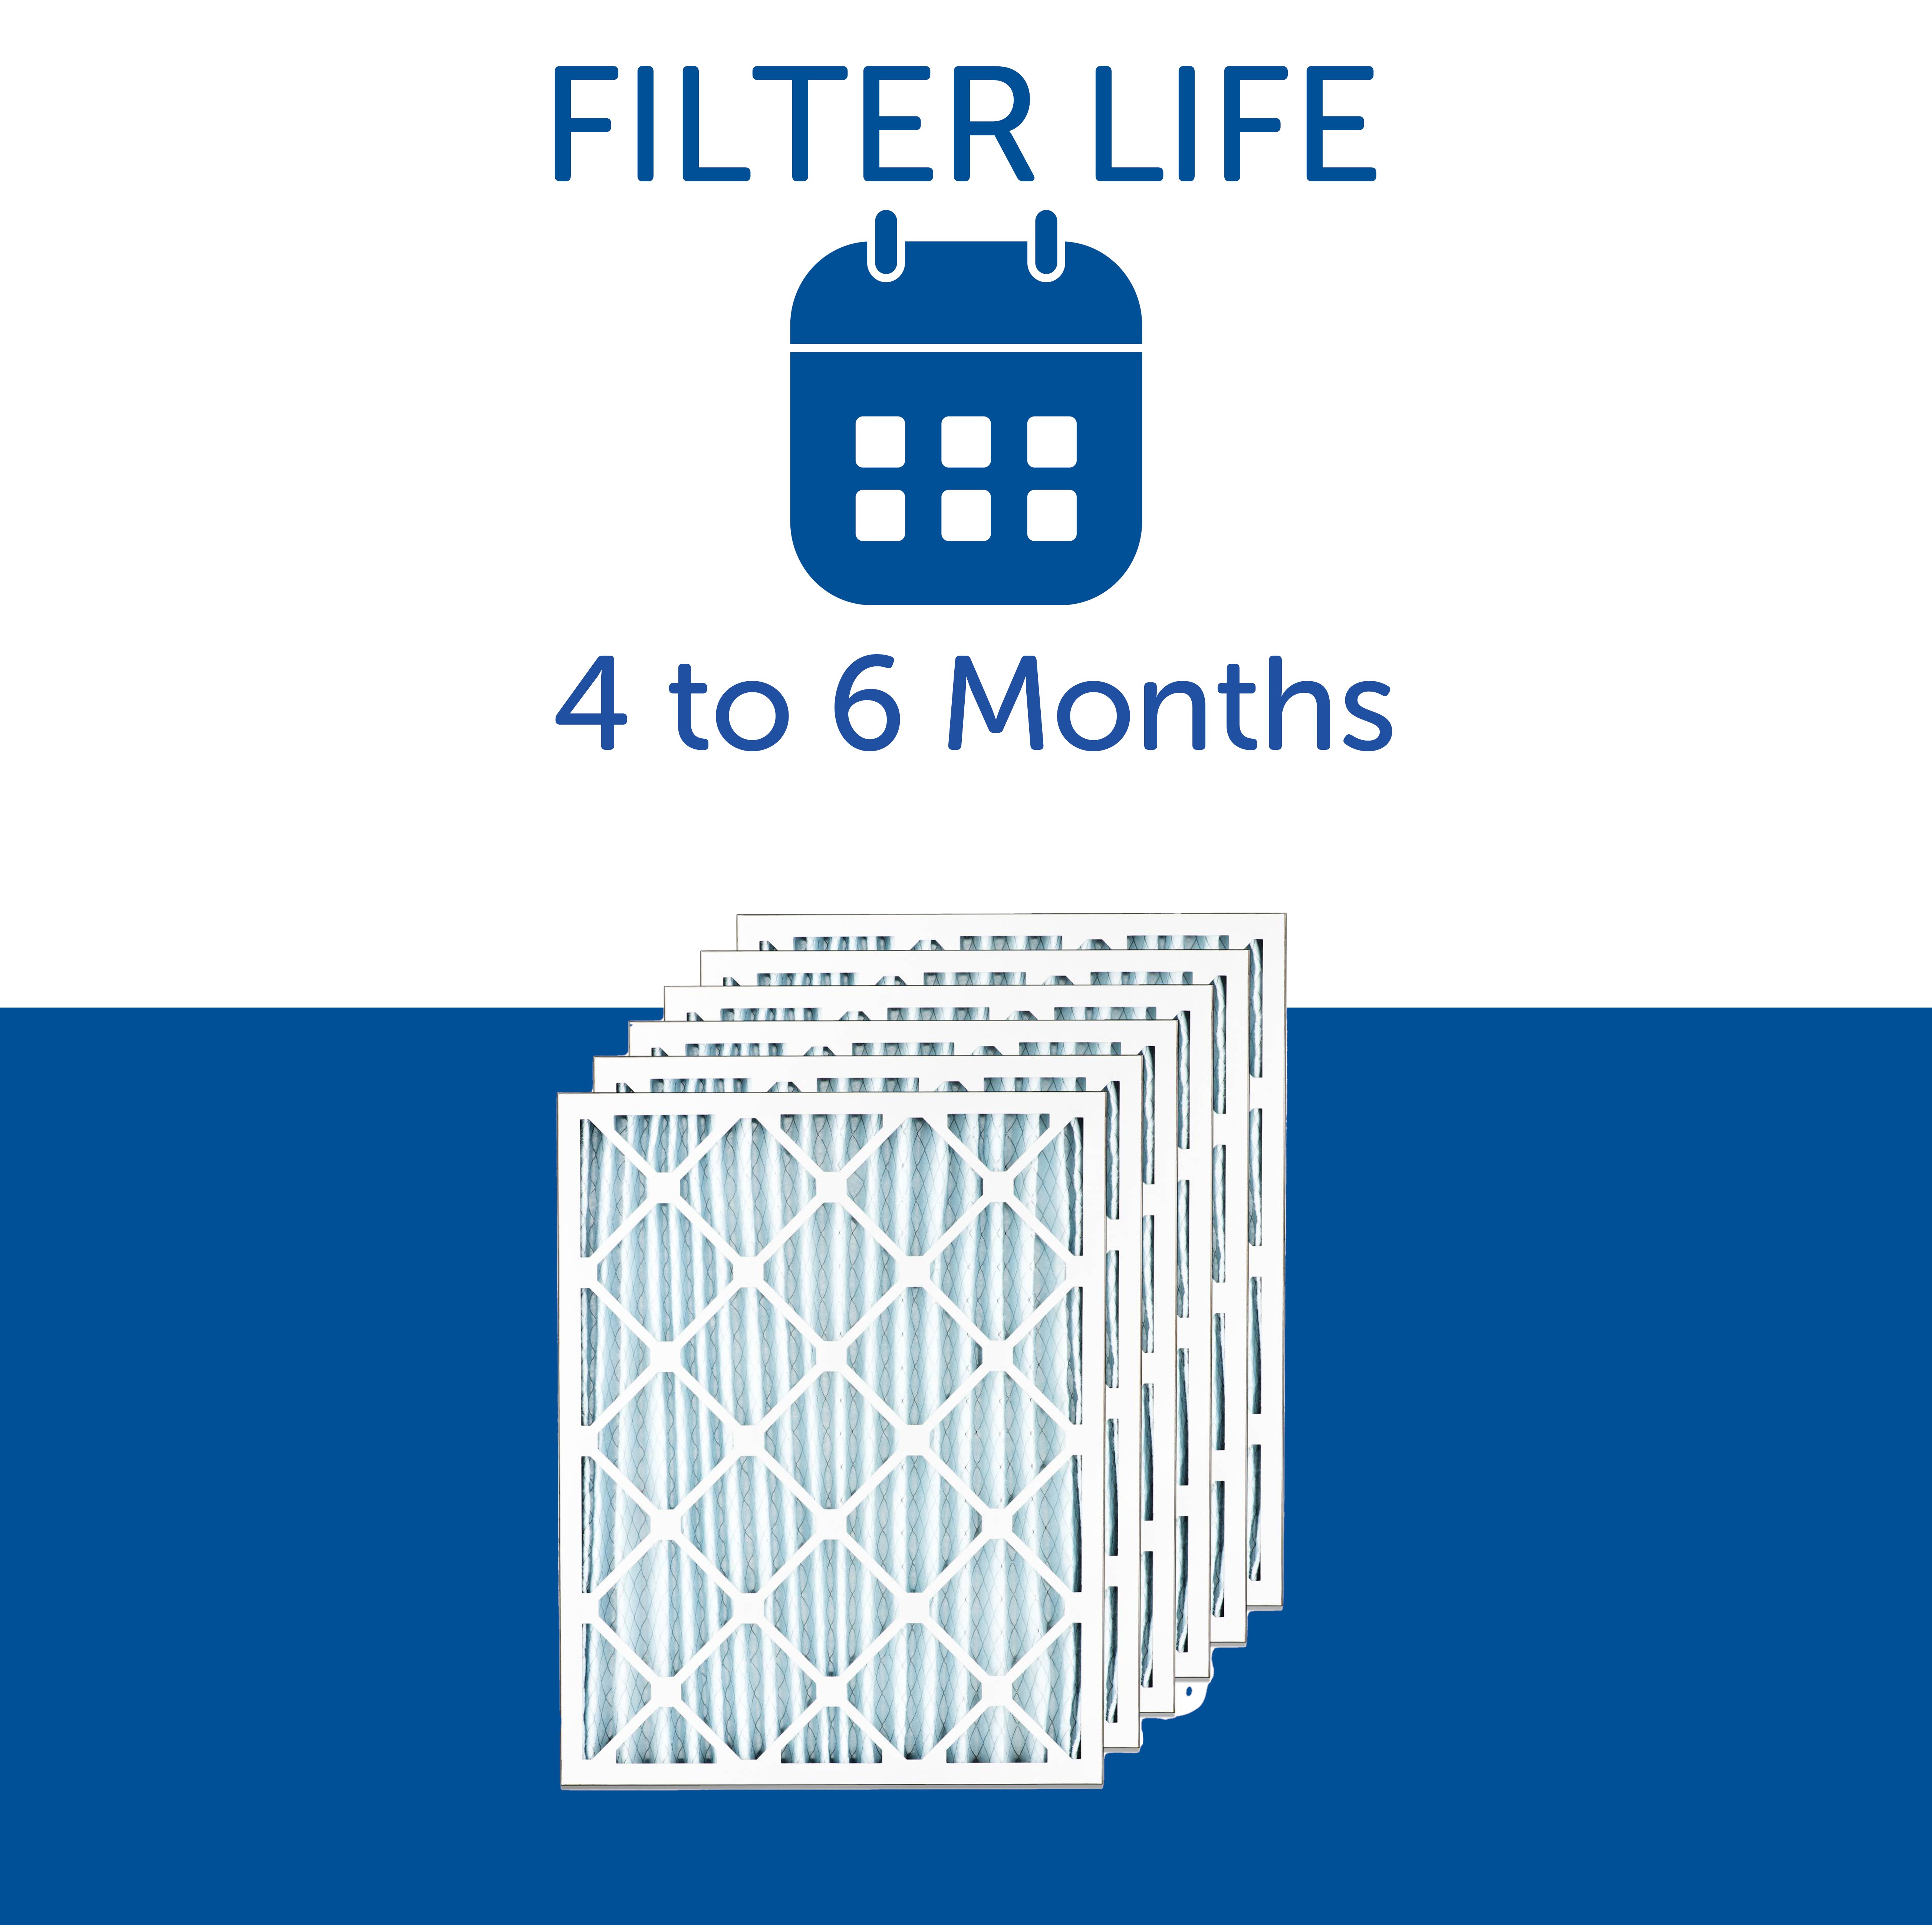 2" MERV 11 Furnace & AC Air Filter by Filters Fast&reg; - 6-Pack